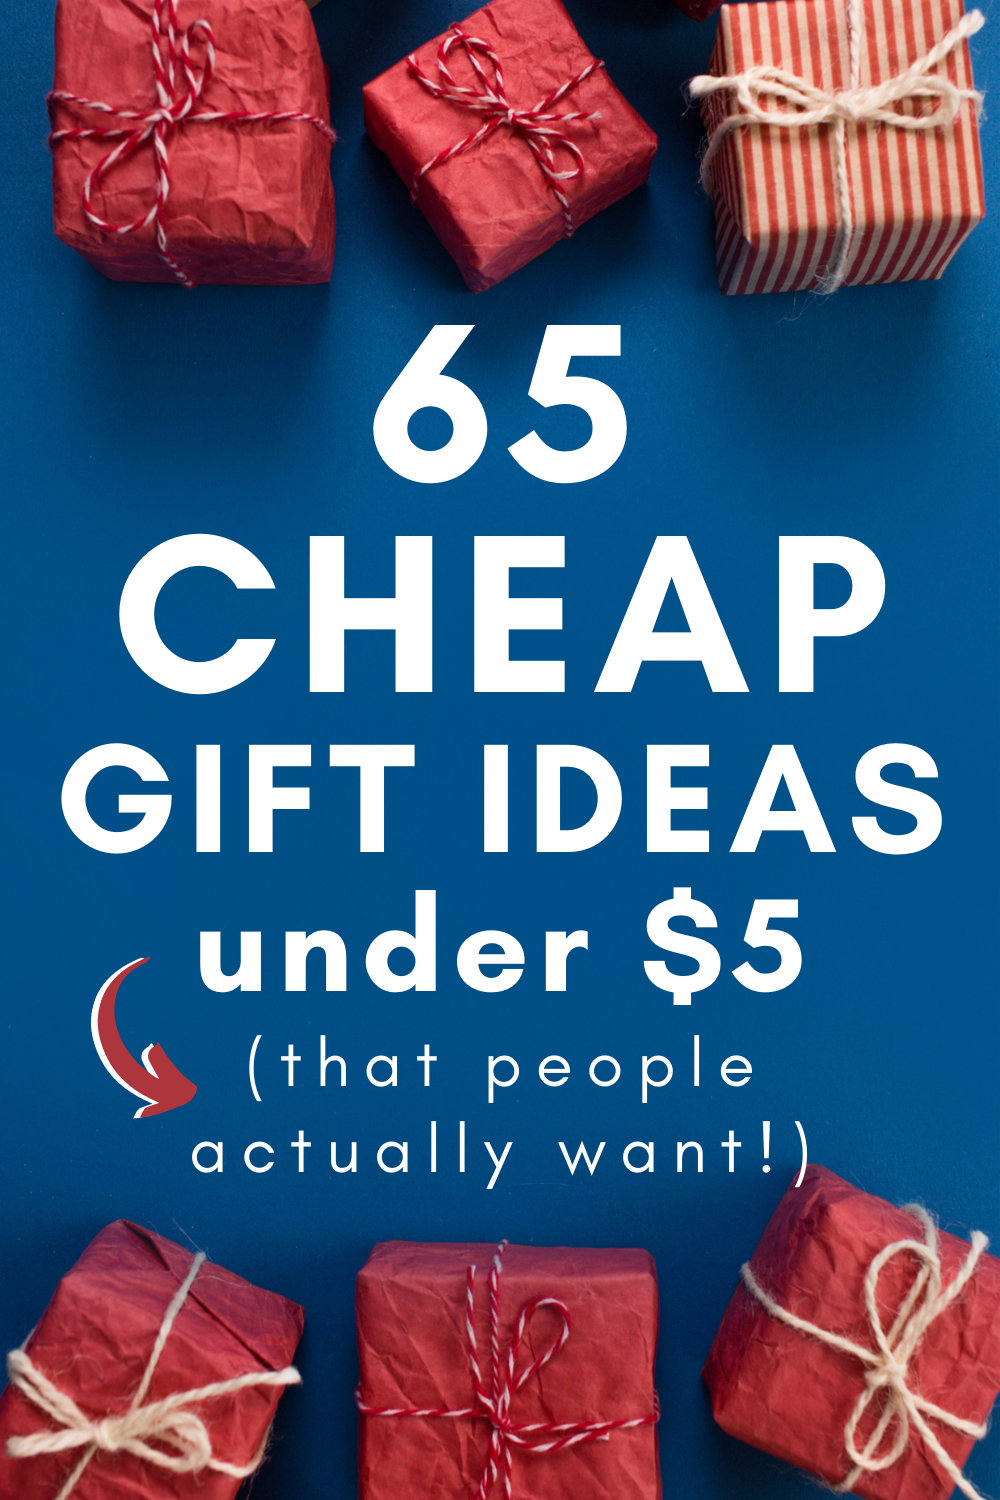 65 Fun & Unique Gifts Under $5 (small useful gifts that people